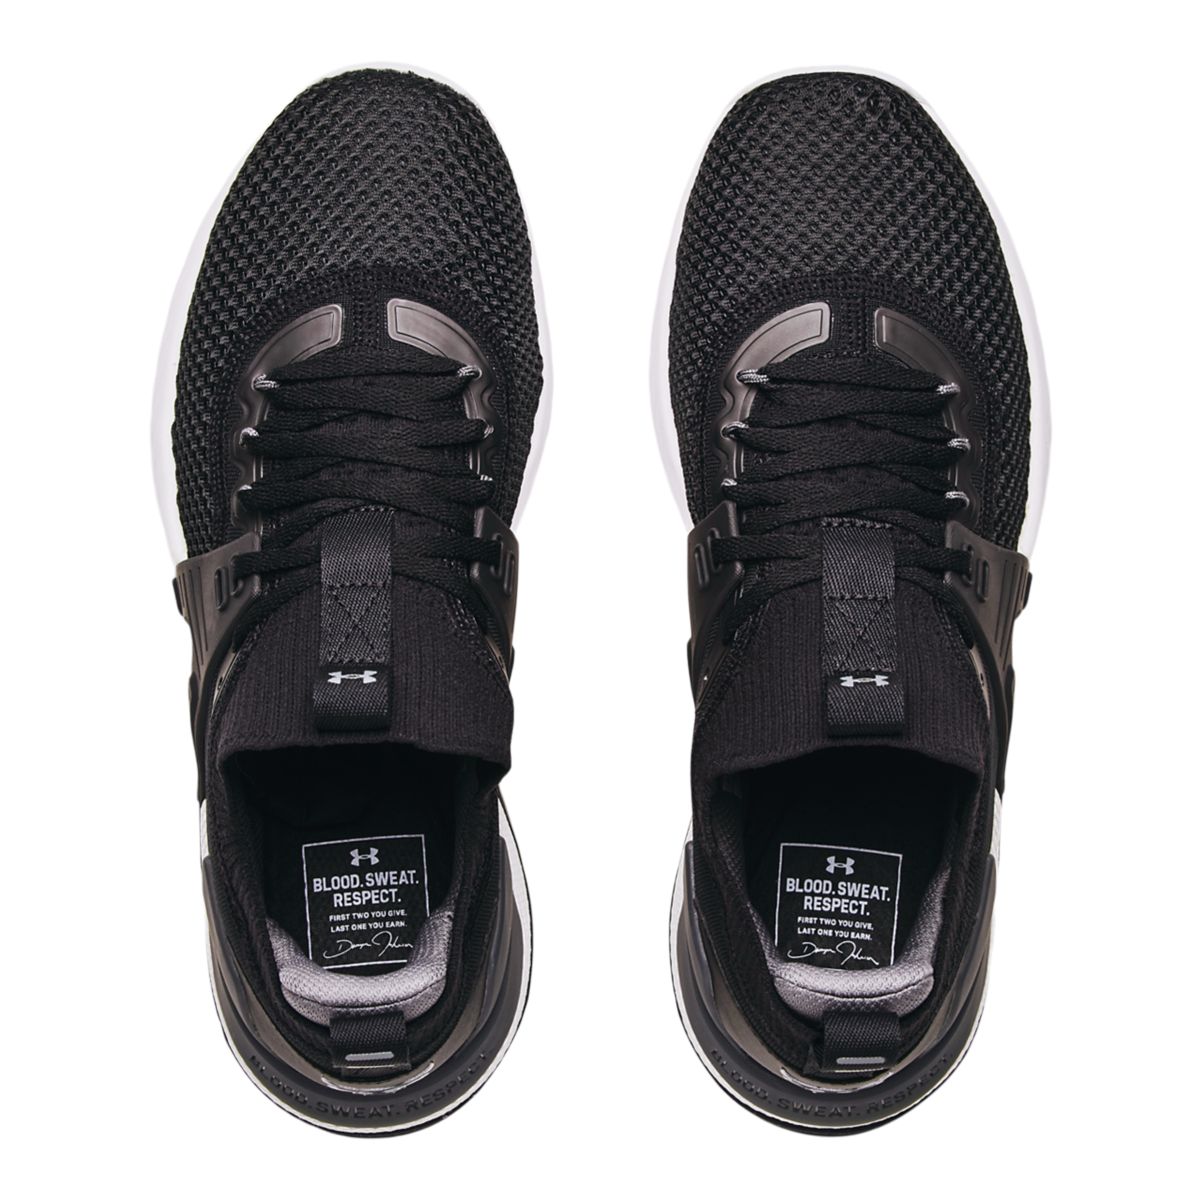 https://media-www.atmosphere.ca/product/div-05-footwear/dpt-80-footwear/sdpt-01-mens/333416732/under-armour-project-rock-4-b-black-white-pitch-gray-8--6e6a5101-0e9a-4629-8849-068a7df6328c-jpgrendition.jpg?imdensity=1&imwidth=1244&impolicy=mZoom